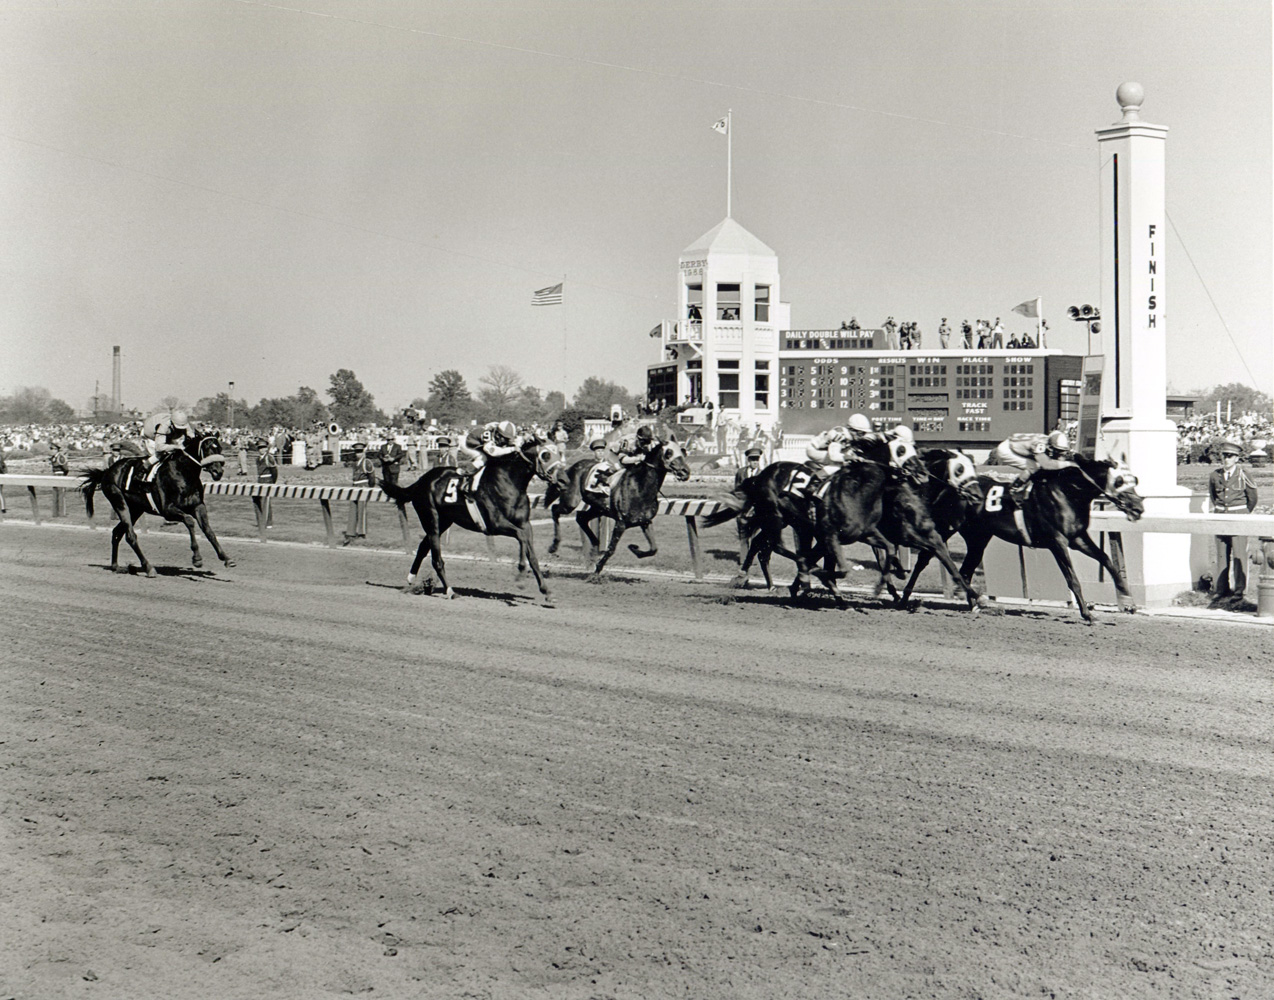 Don Brumfield and Kauai King winning the 1966 Kentucky Derby at Churchill Downs (Churchill Downs Inc./Kinetic Corp. /Museum Collection)